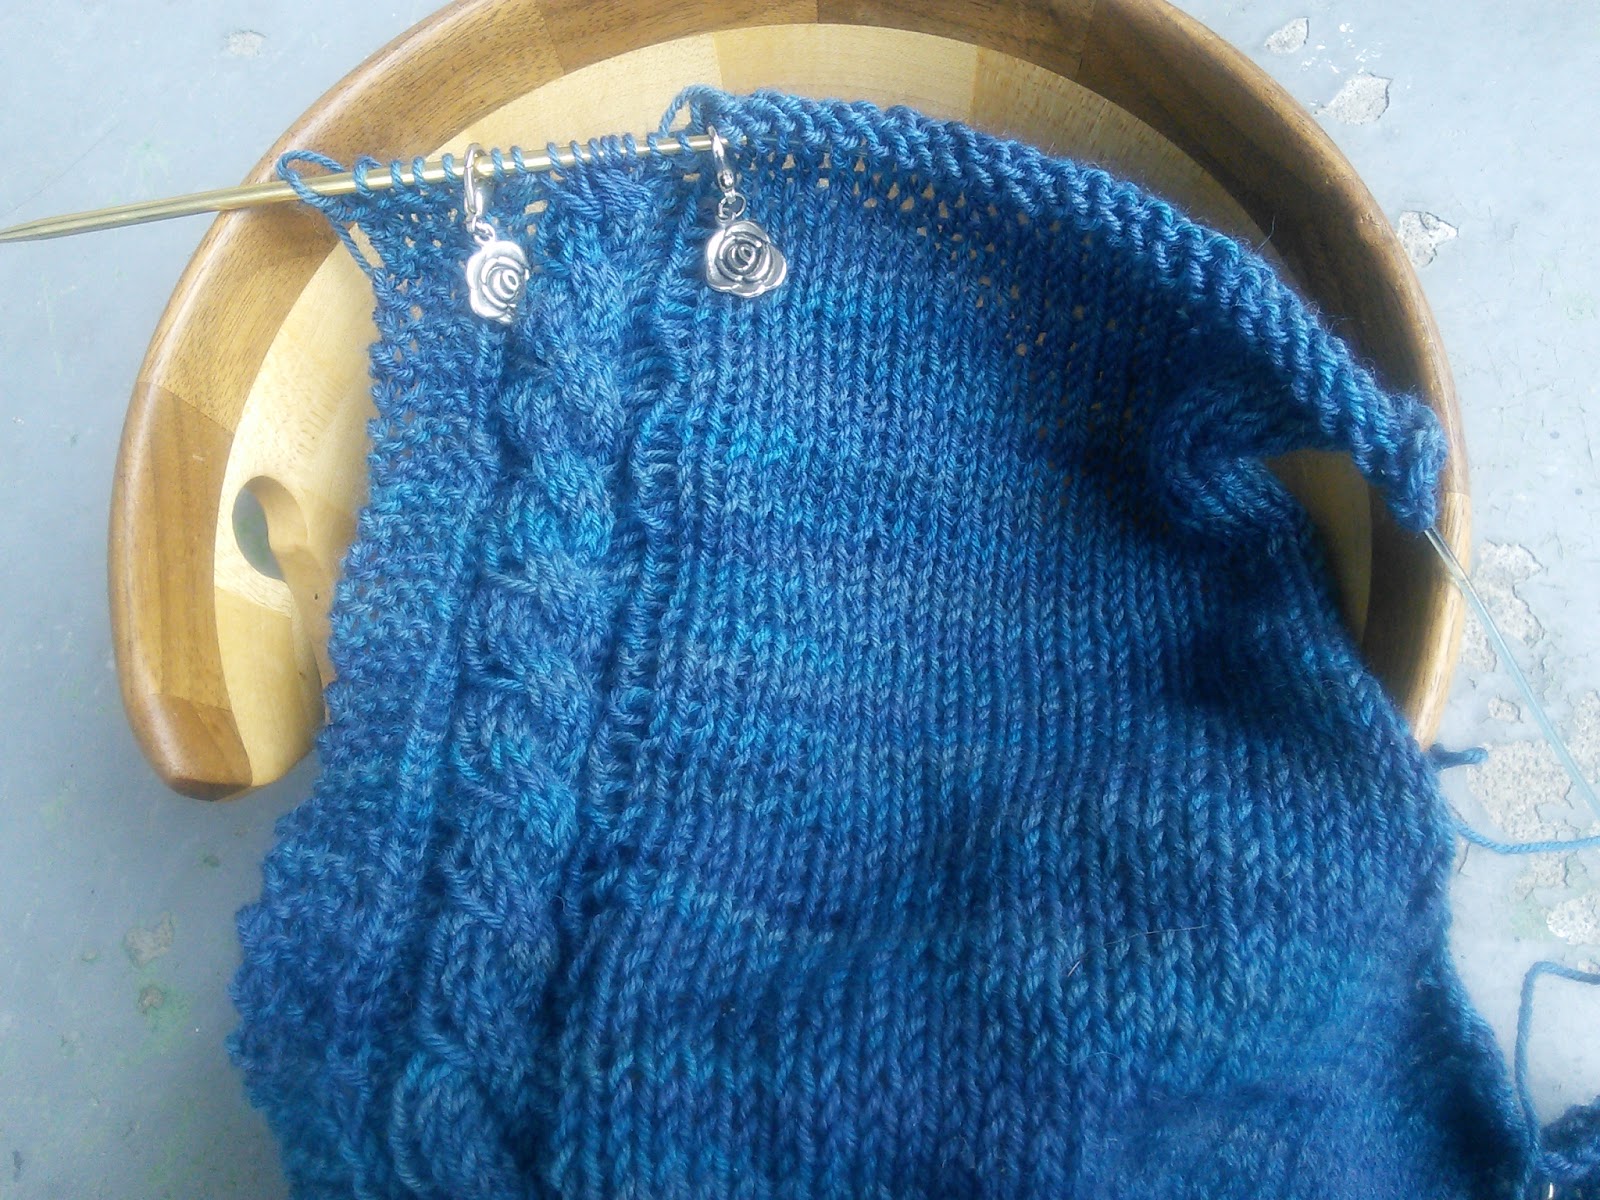 WIP Wednesday: Collar of the Hooded Cardigan!